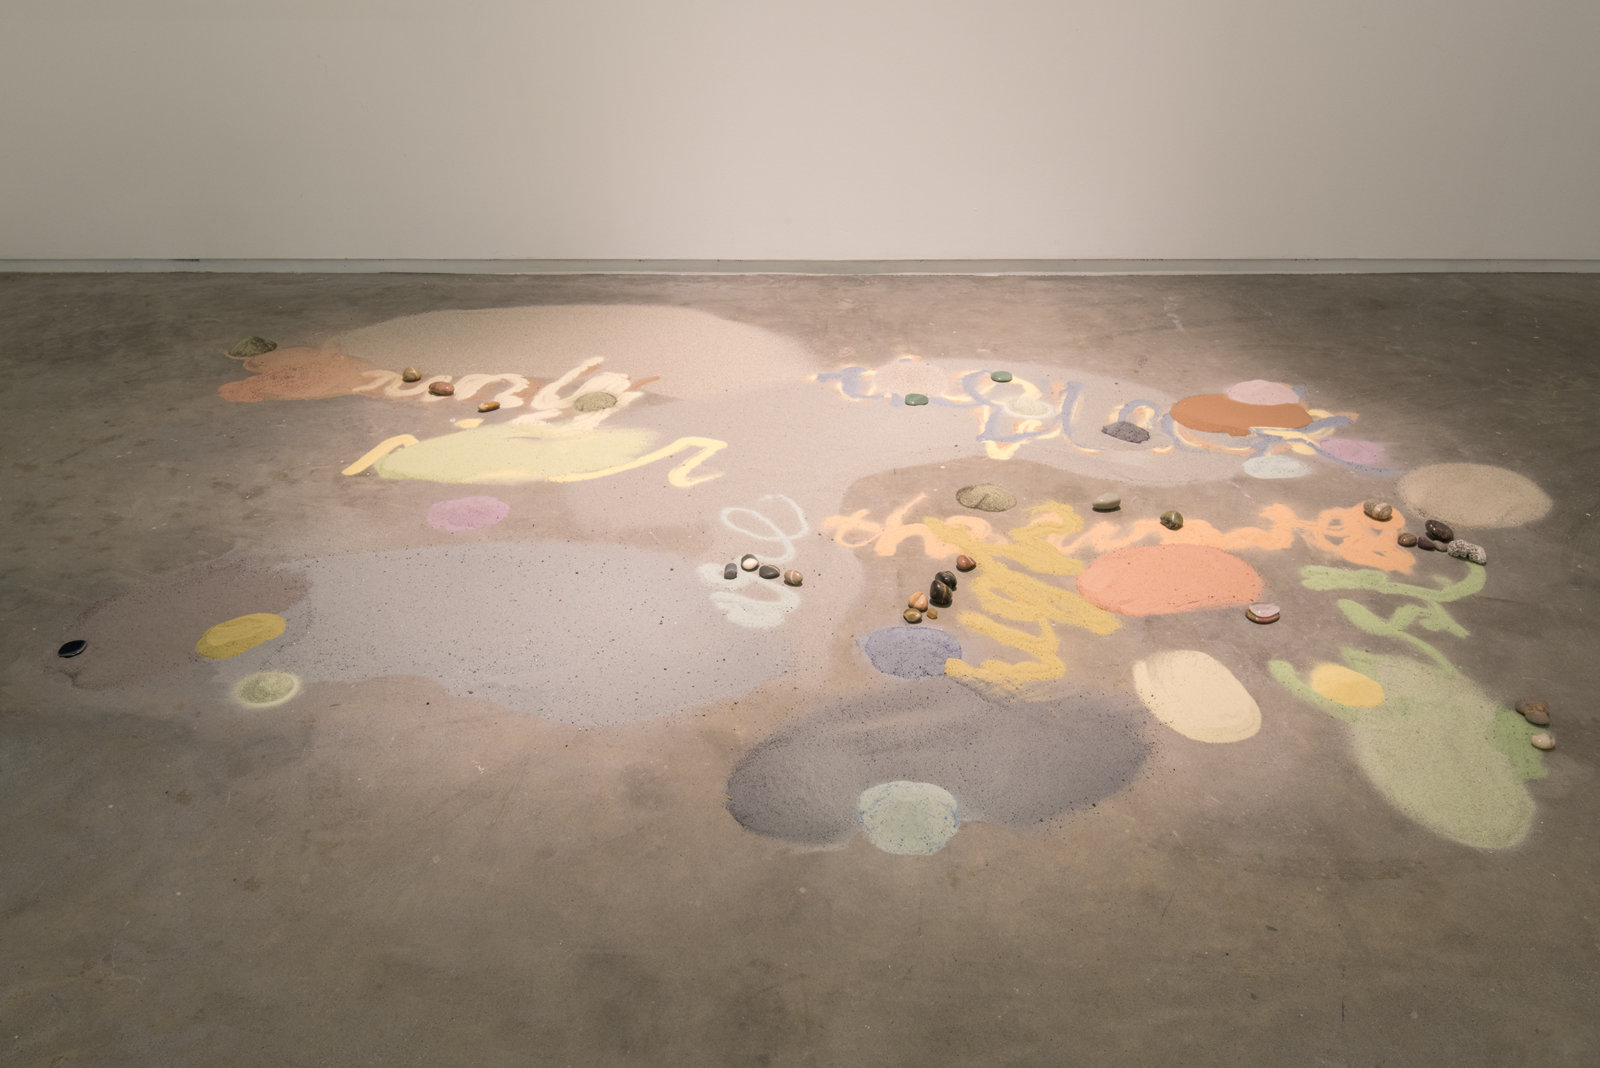 Christina Mackie, Interzonal (detail), 2002–2012, Nightlight, DVD, filmed by Quentin Mackie, sand, pigments, beach stones polished by Gillian Mackie, inkjet print, fir, steel cloth, plastic, ceramics (George and Christina Mackie), Forestface, DVD projection, fluorescent lamps, dimensions variable